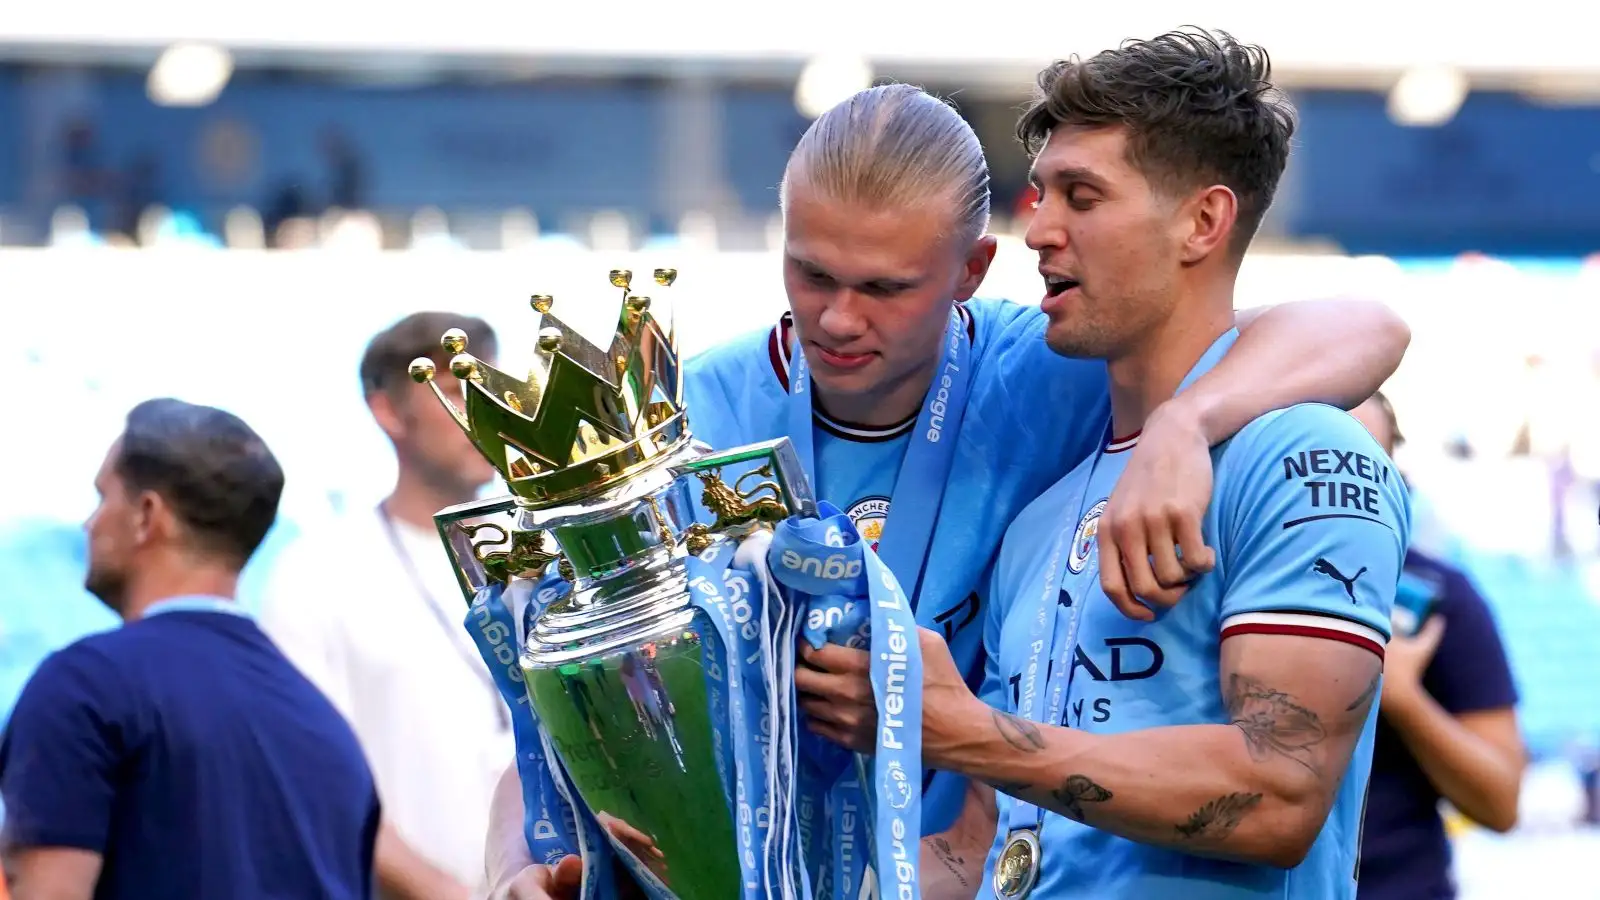 John Stones and Erling Haaland analyse the Premier League trophy